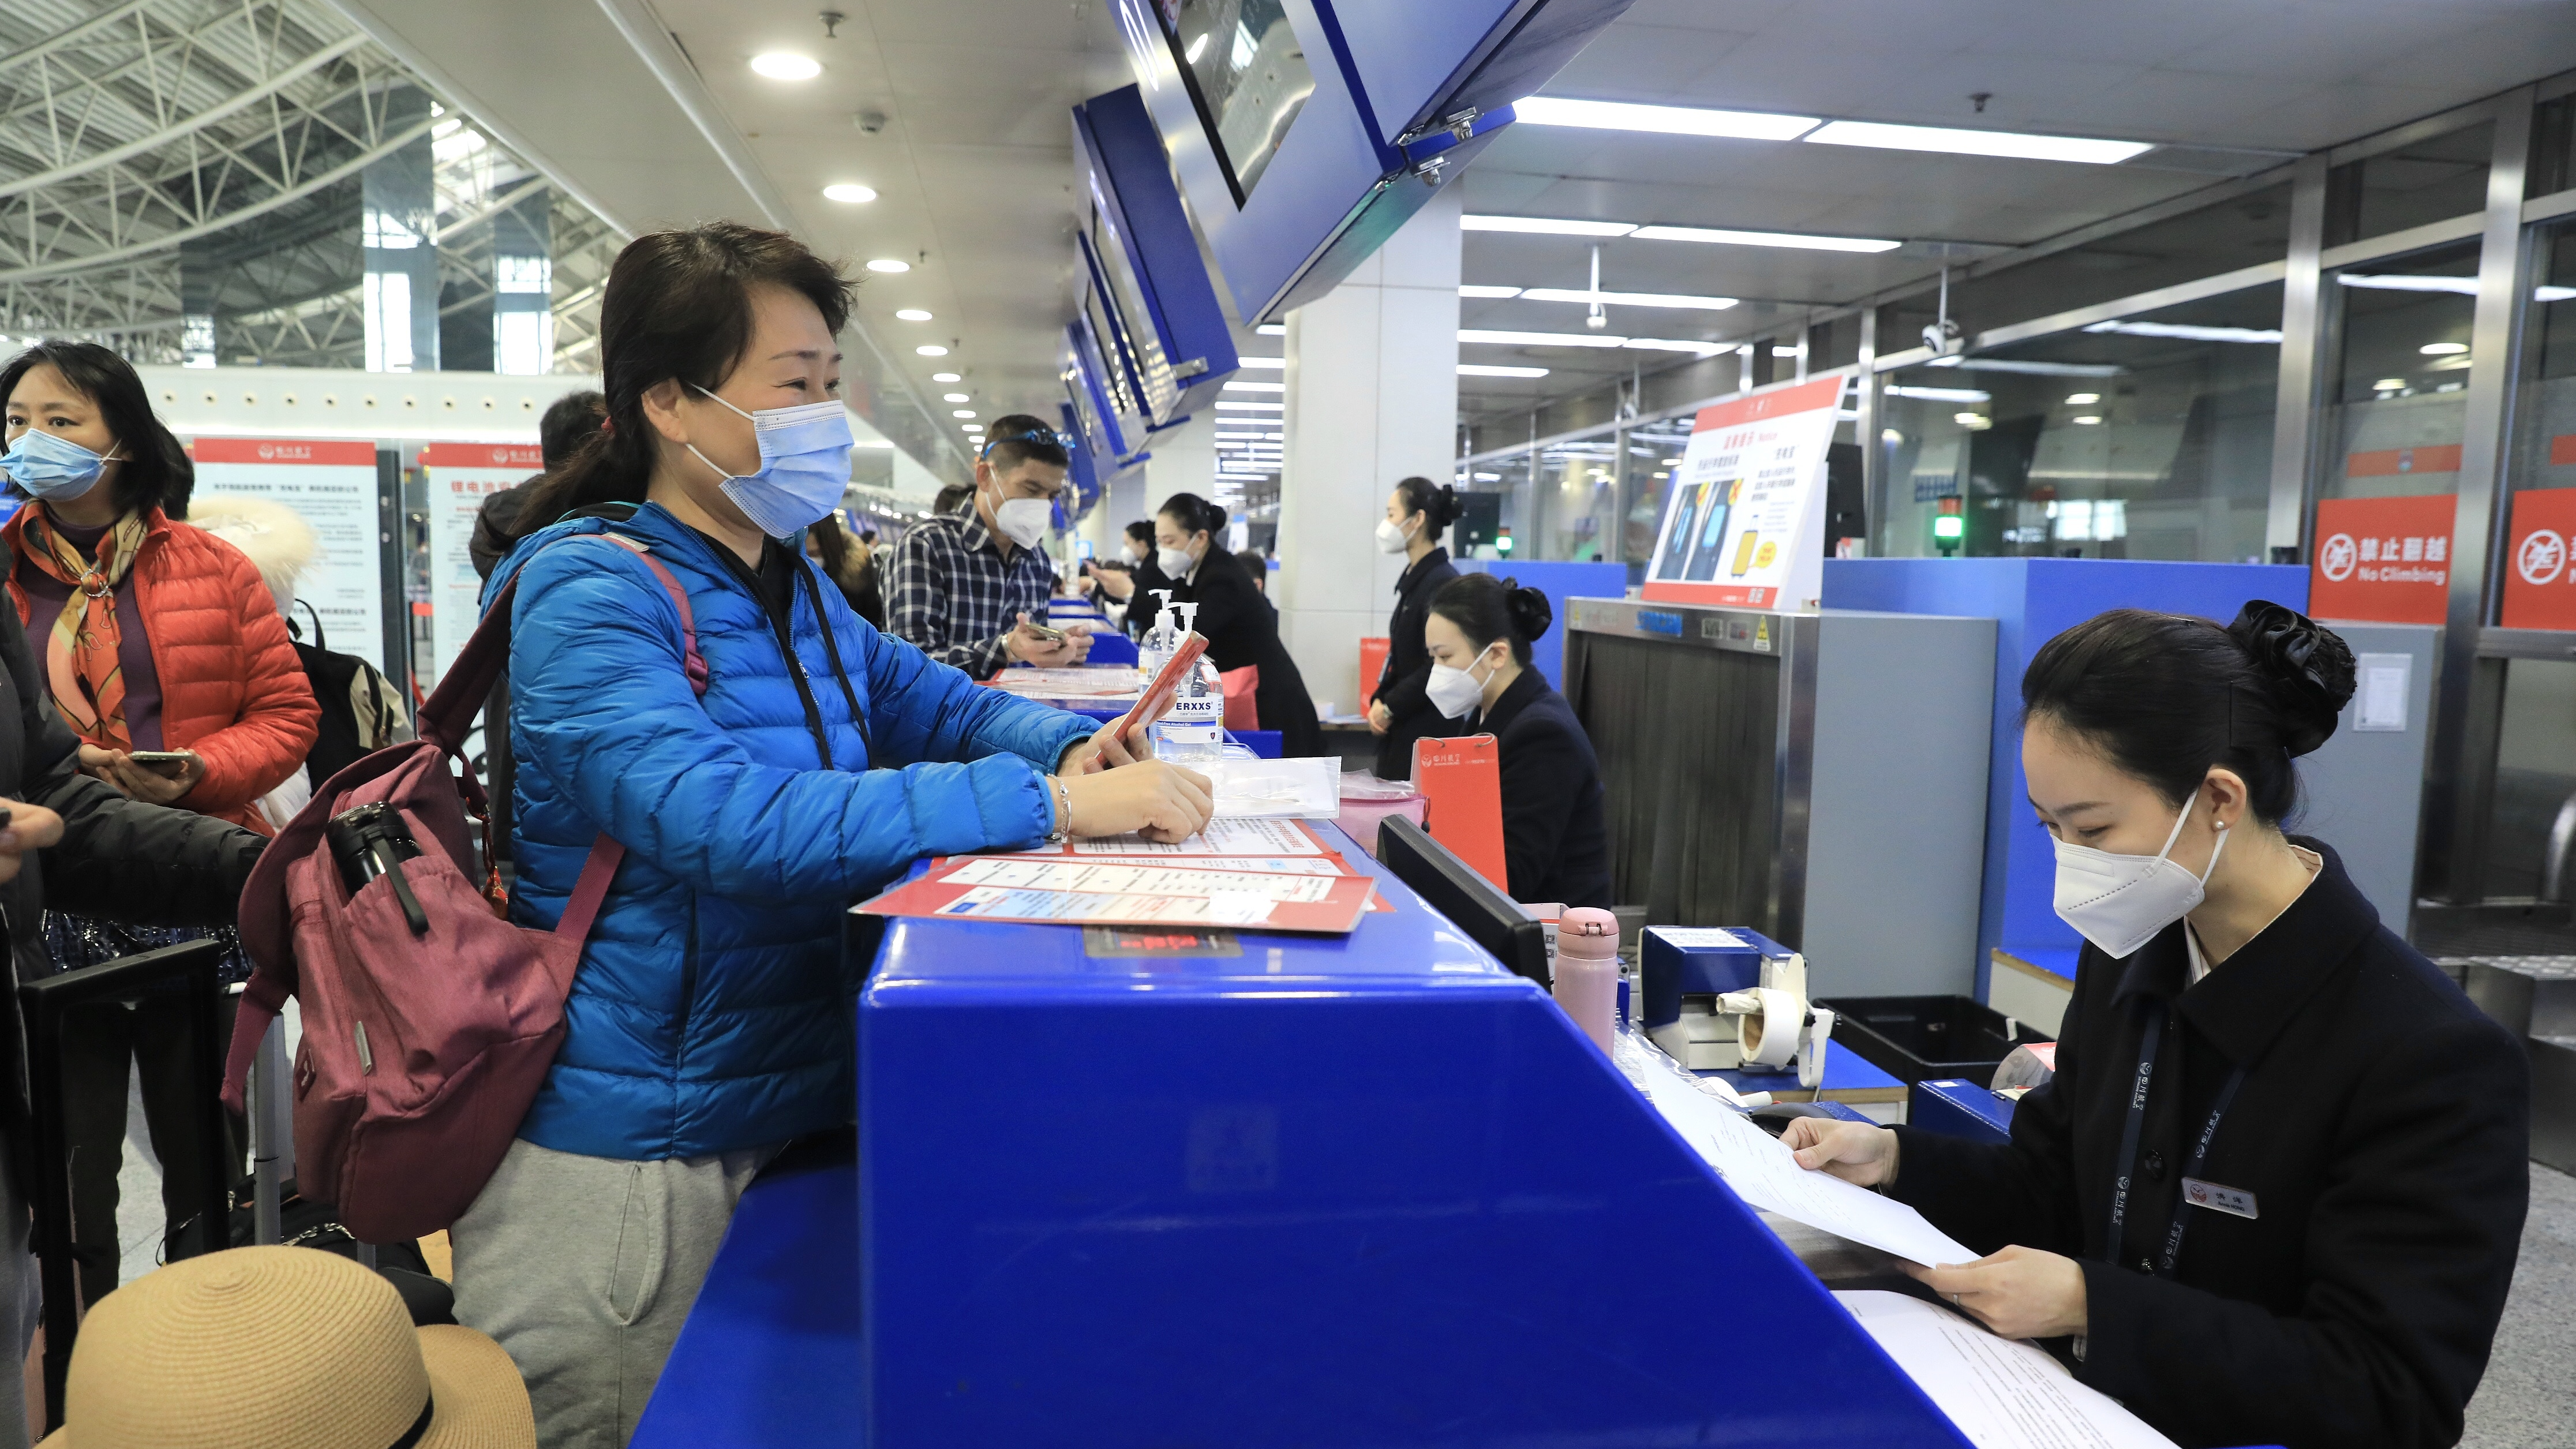 A tourist heading to Thailand checks in at an airport in Chengdu, southwest China's Sichuan Province, February 6, 2023. /CFP